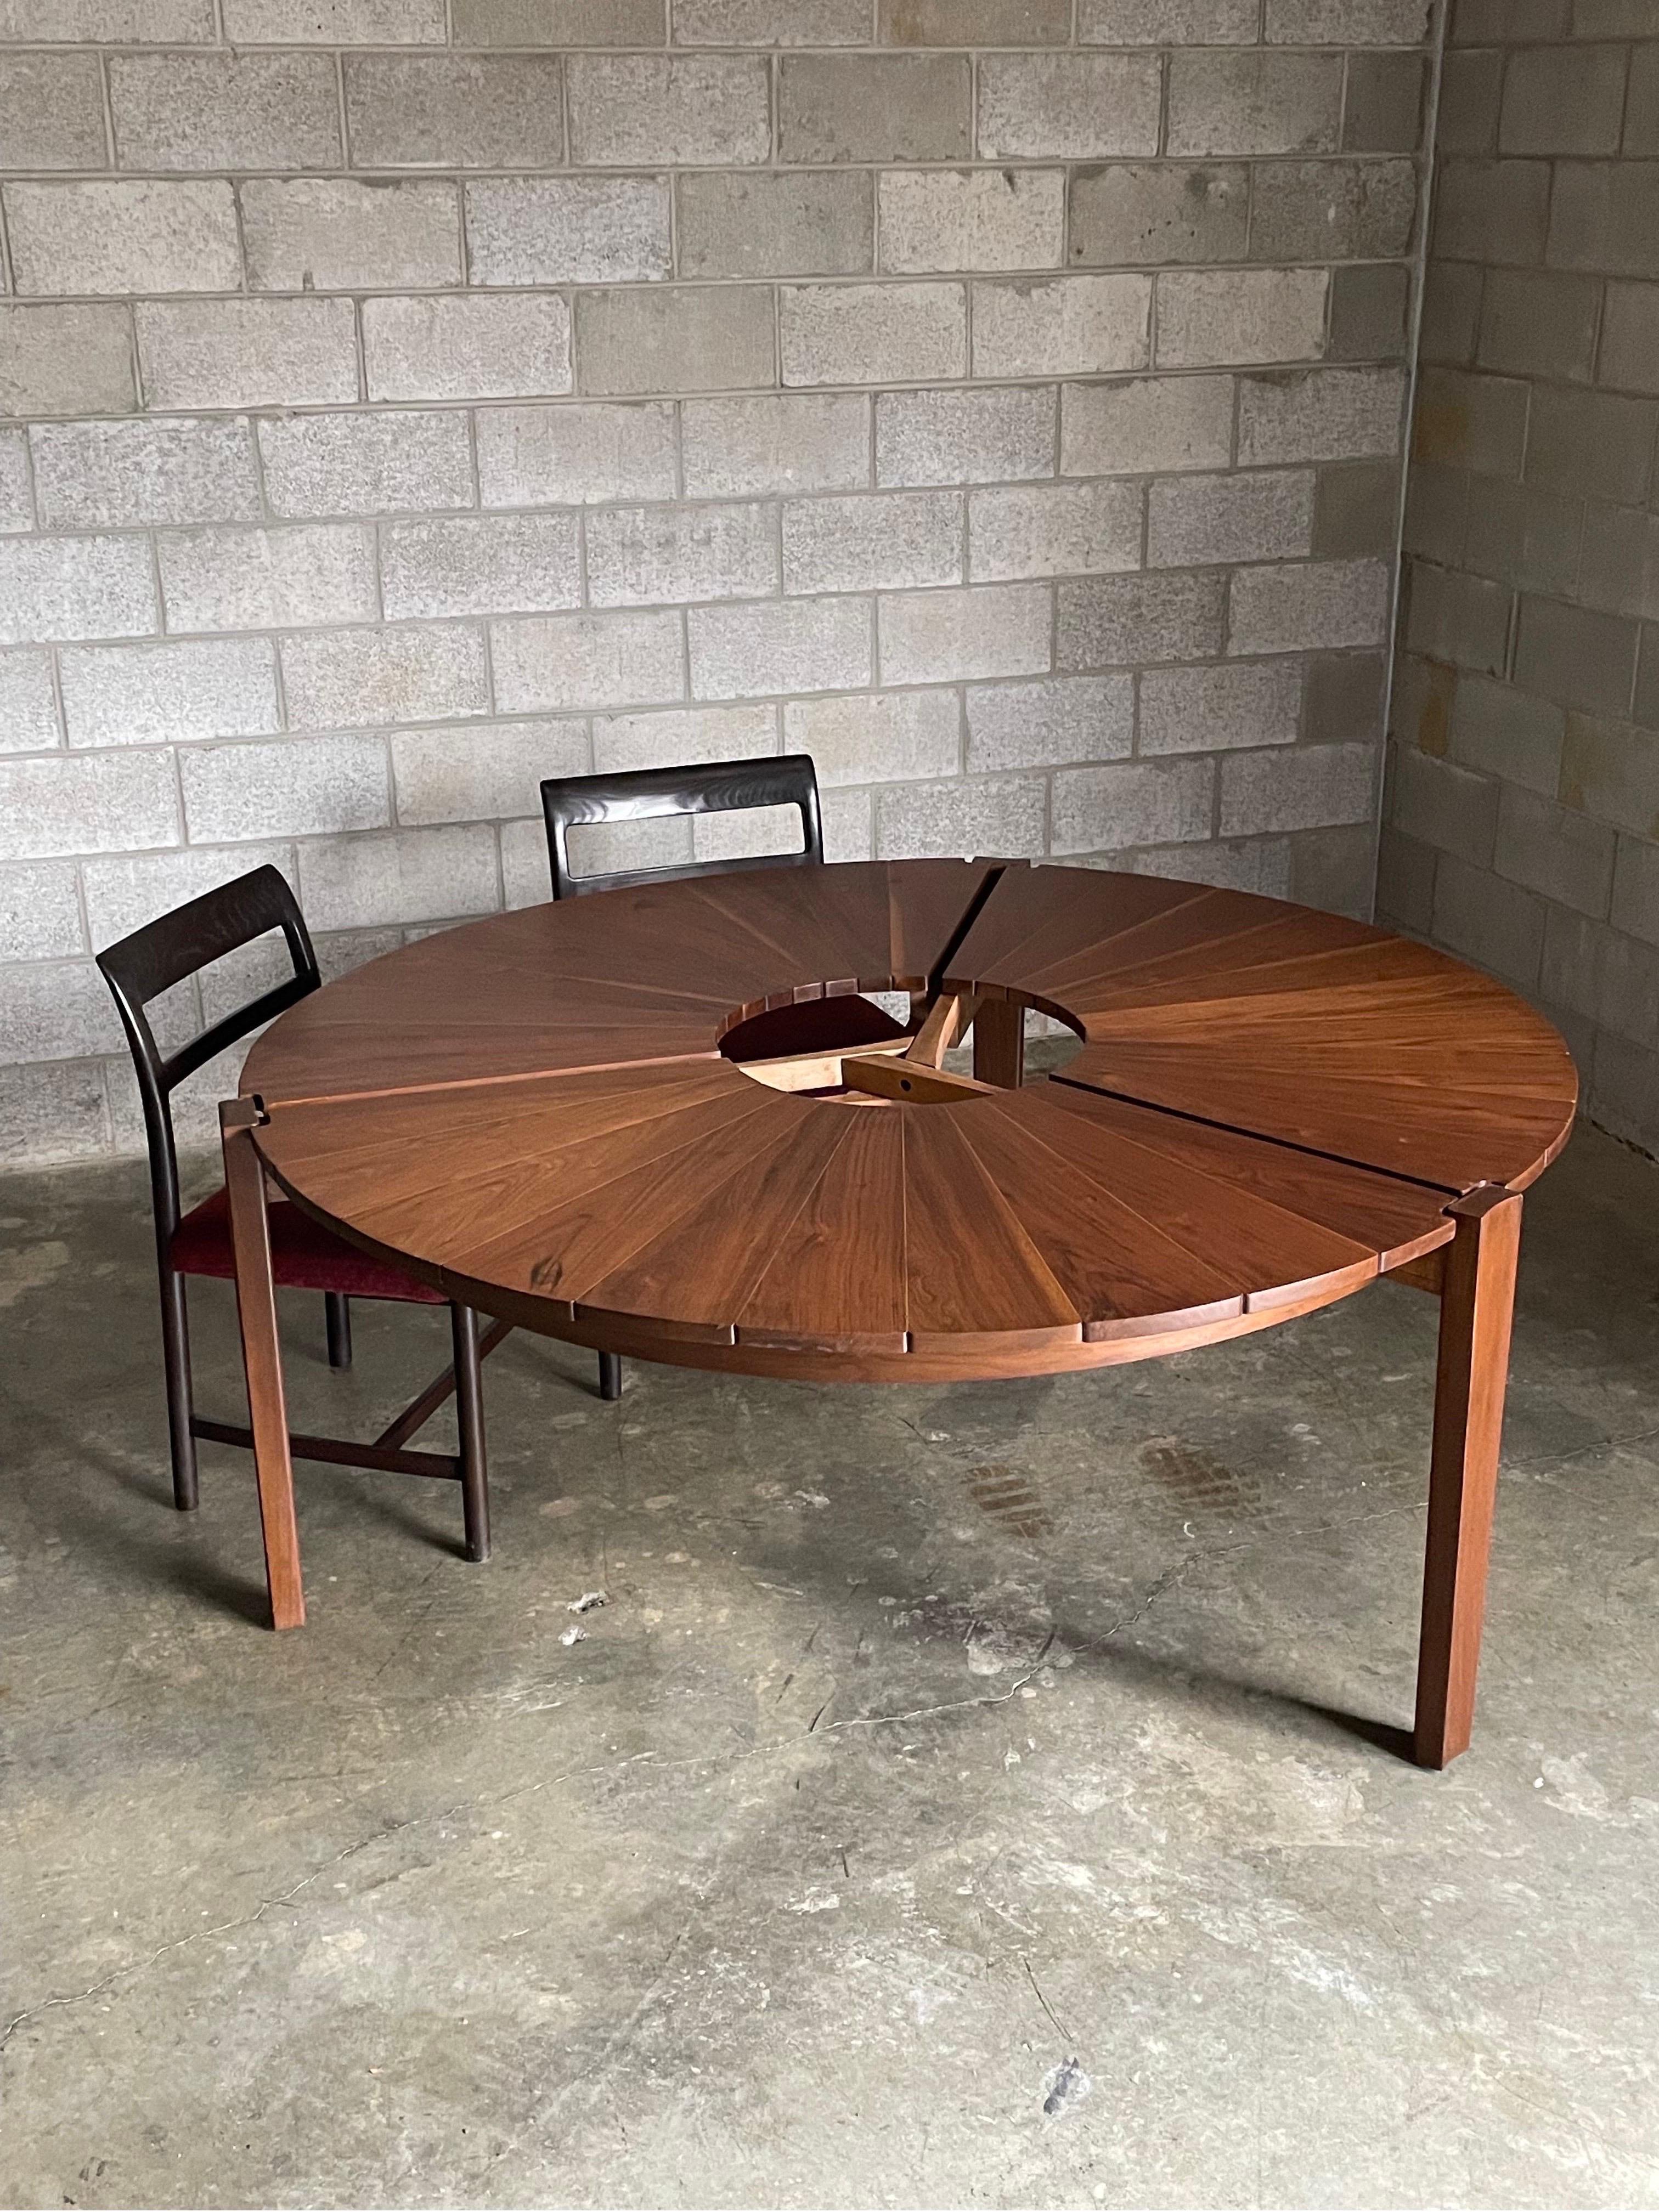 Studiocraft Round Petal Dining Table in Walnut and Maple, Charles Faucher 1975 For Sale 1